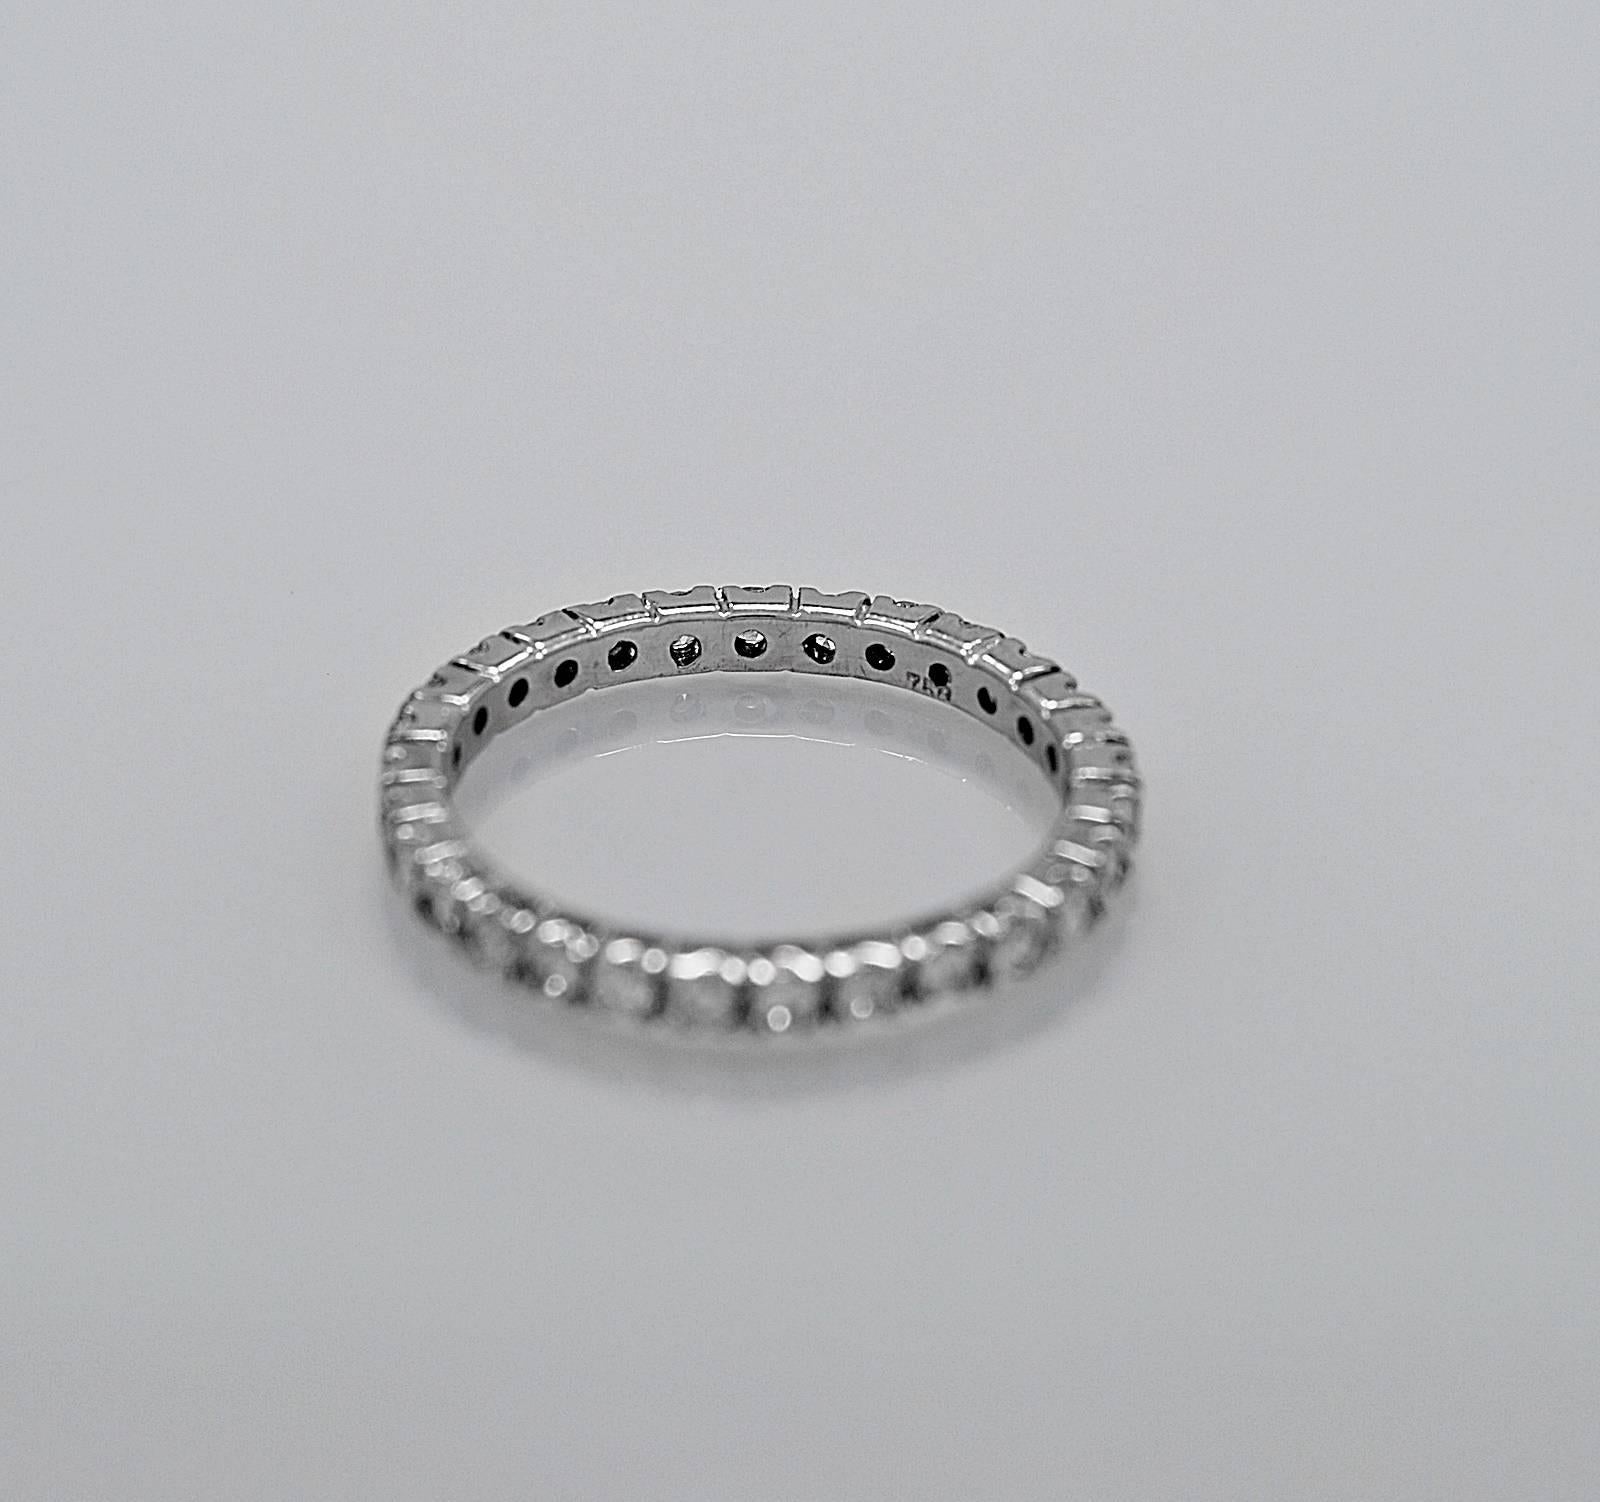 A classic estate wedding band featuring .75ct. apx. T.W. of round brilliant diamonds. This beautiful prong set diamond eternity band would look lovely with any engagement ring or as a stand alone wedding band. Traditional and elegant!

Primary